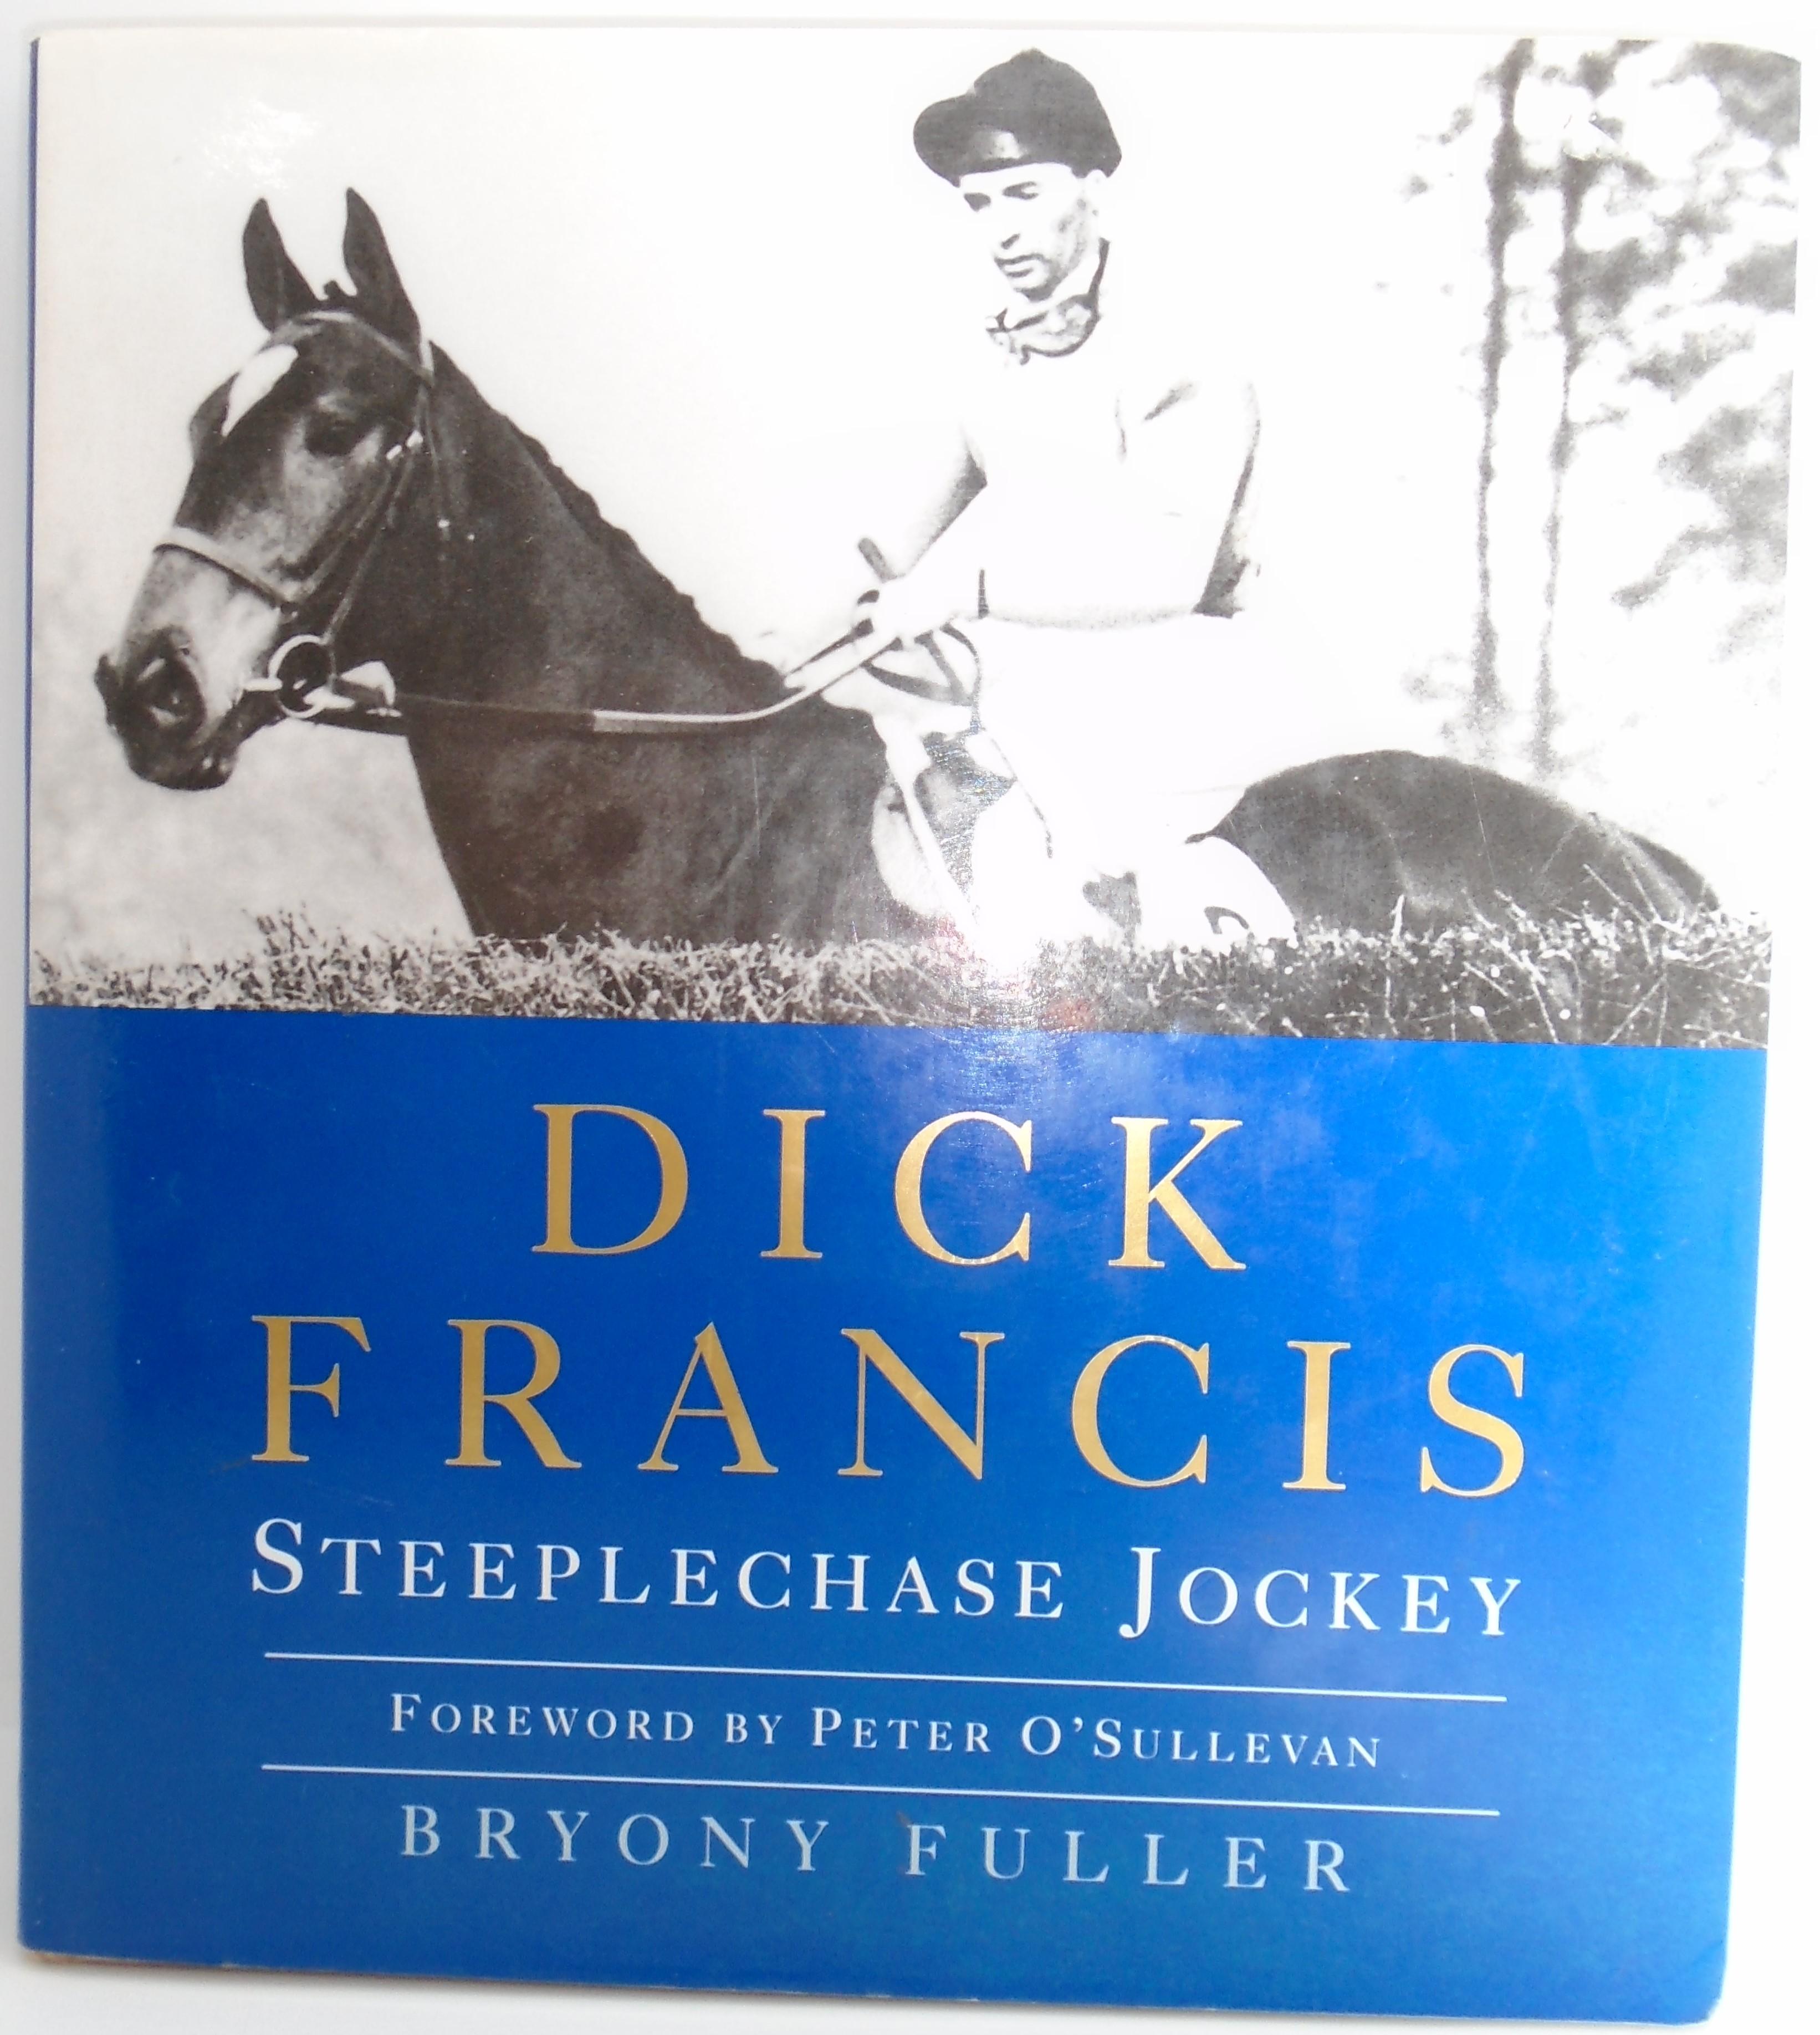 Dick Francis Steeplechase Jockey By Bryony Fuller Very Good Hardcover 1994 1st Edition